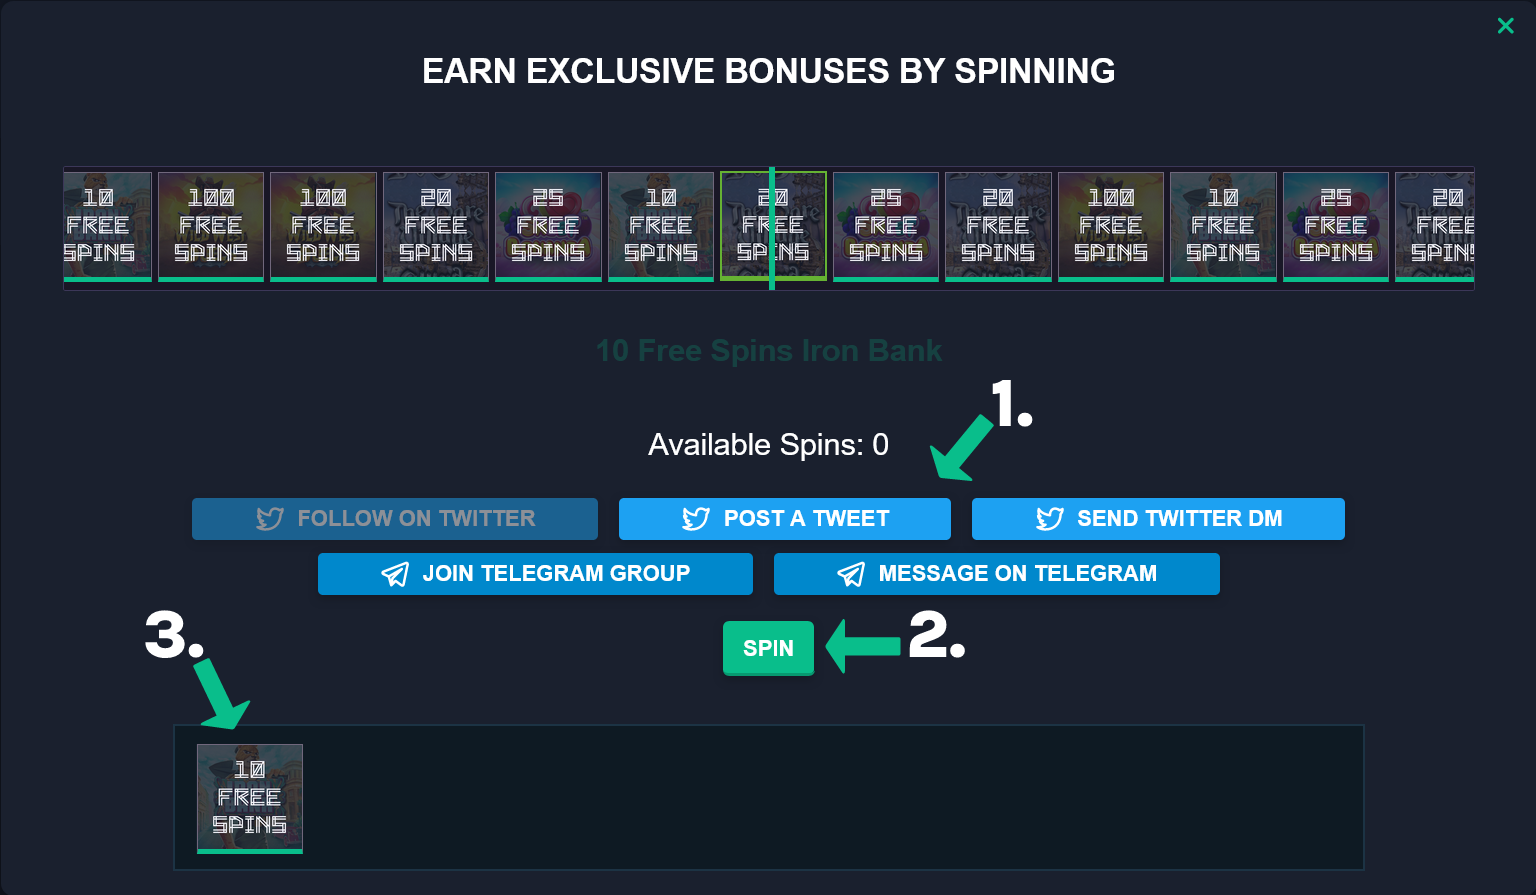 Share to get free spins and to spin for exclusive bonuses